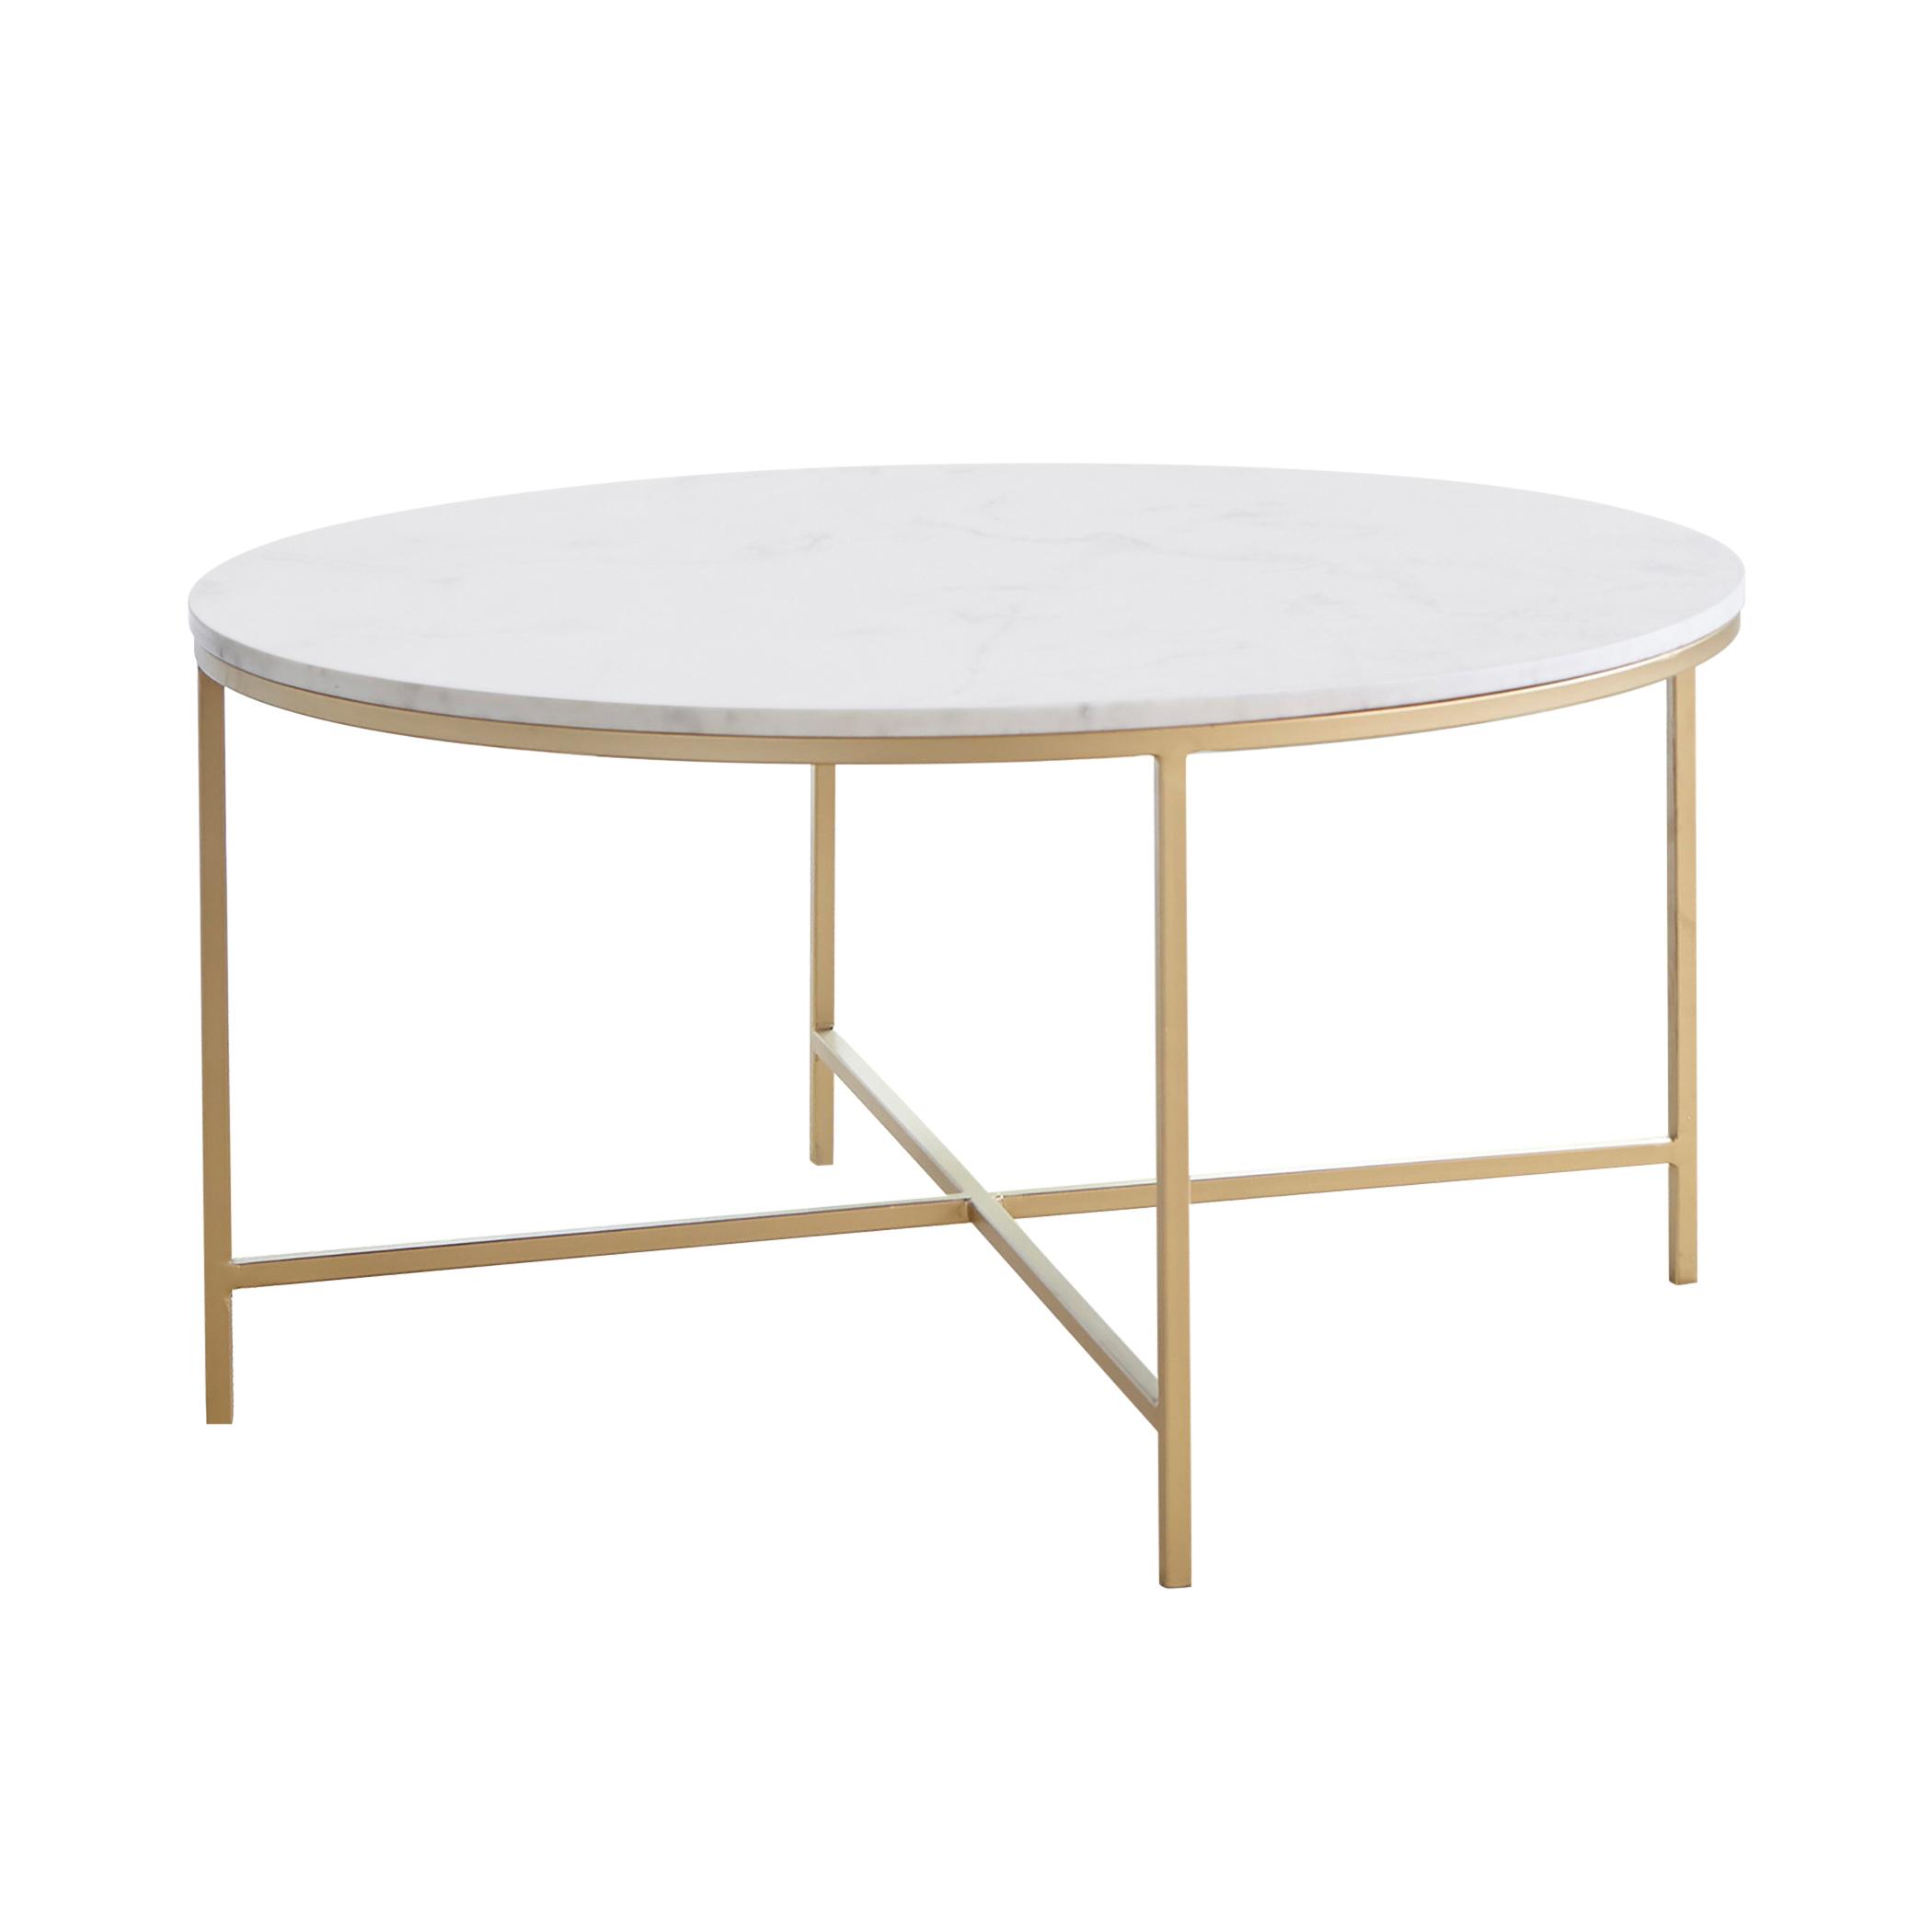 Contemporary Coffee Table 723208 723208 in White, Gold 